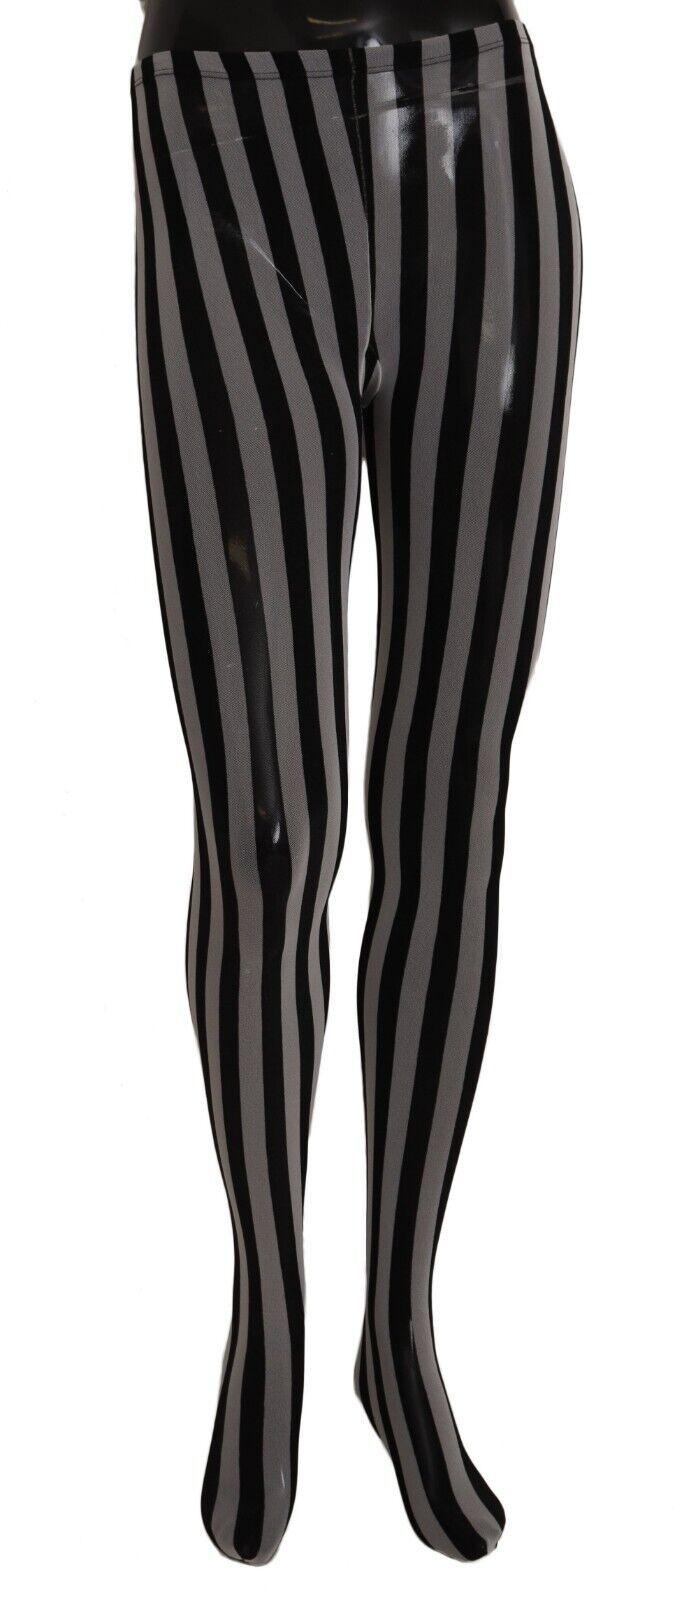 Women's Black and White Striped Tights